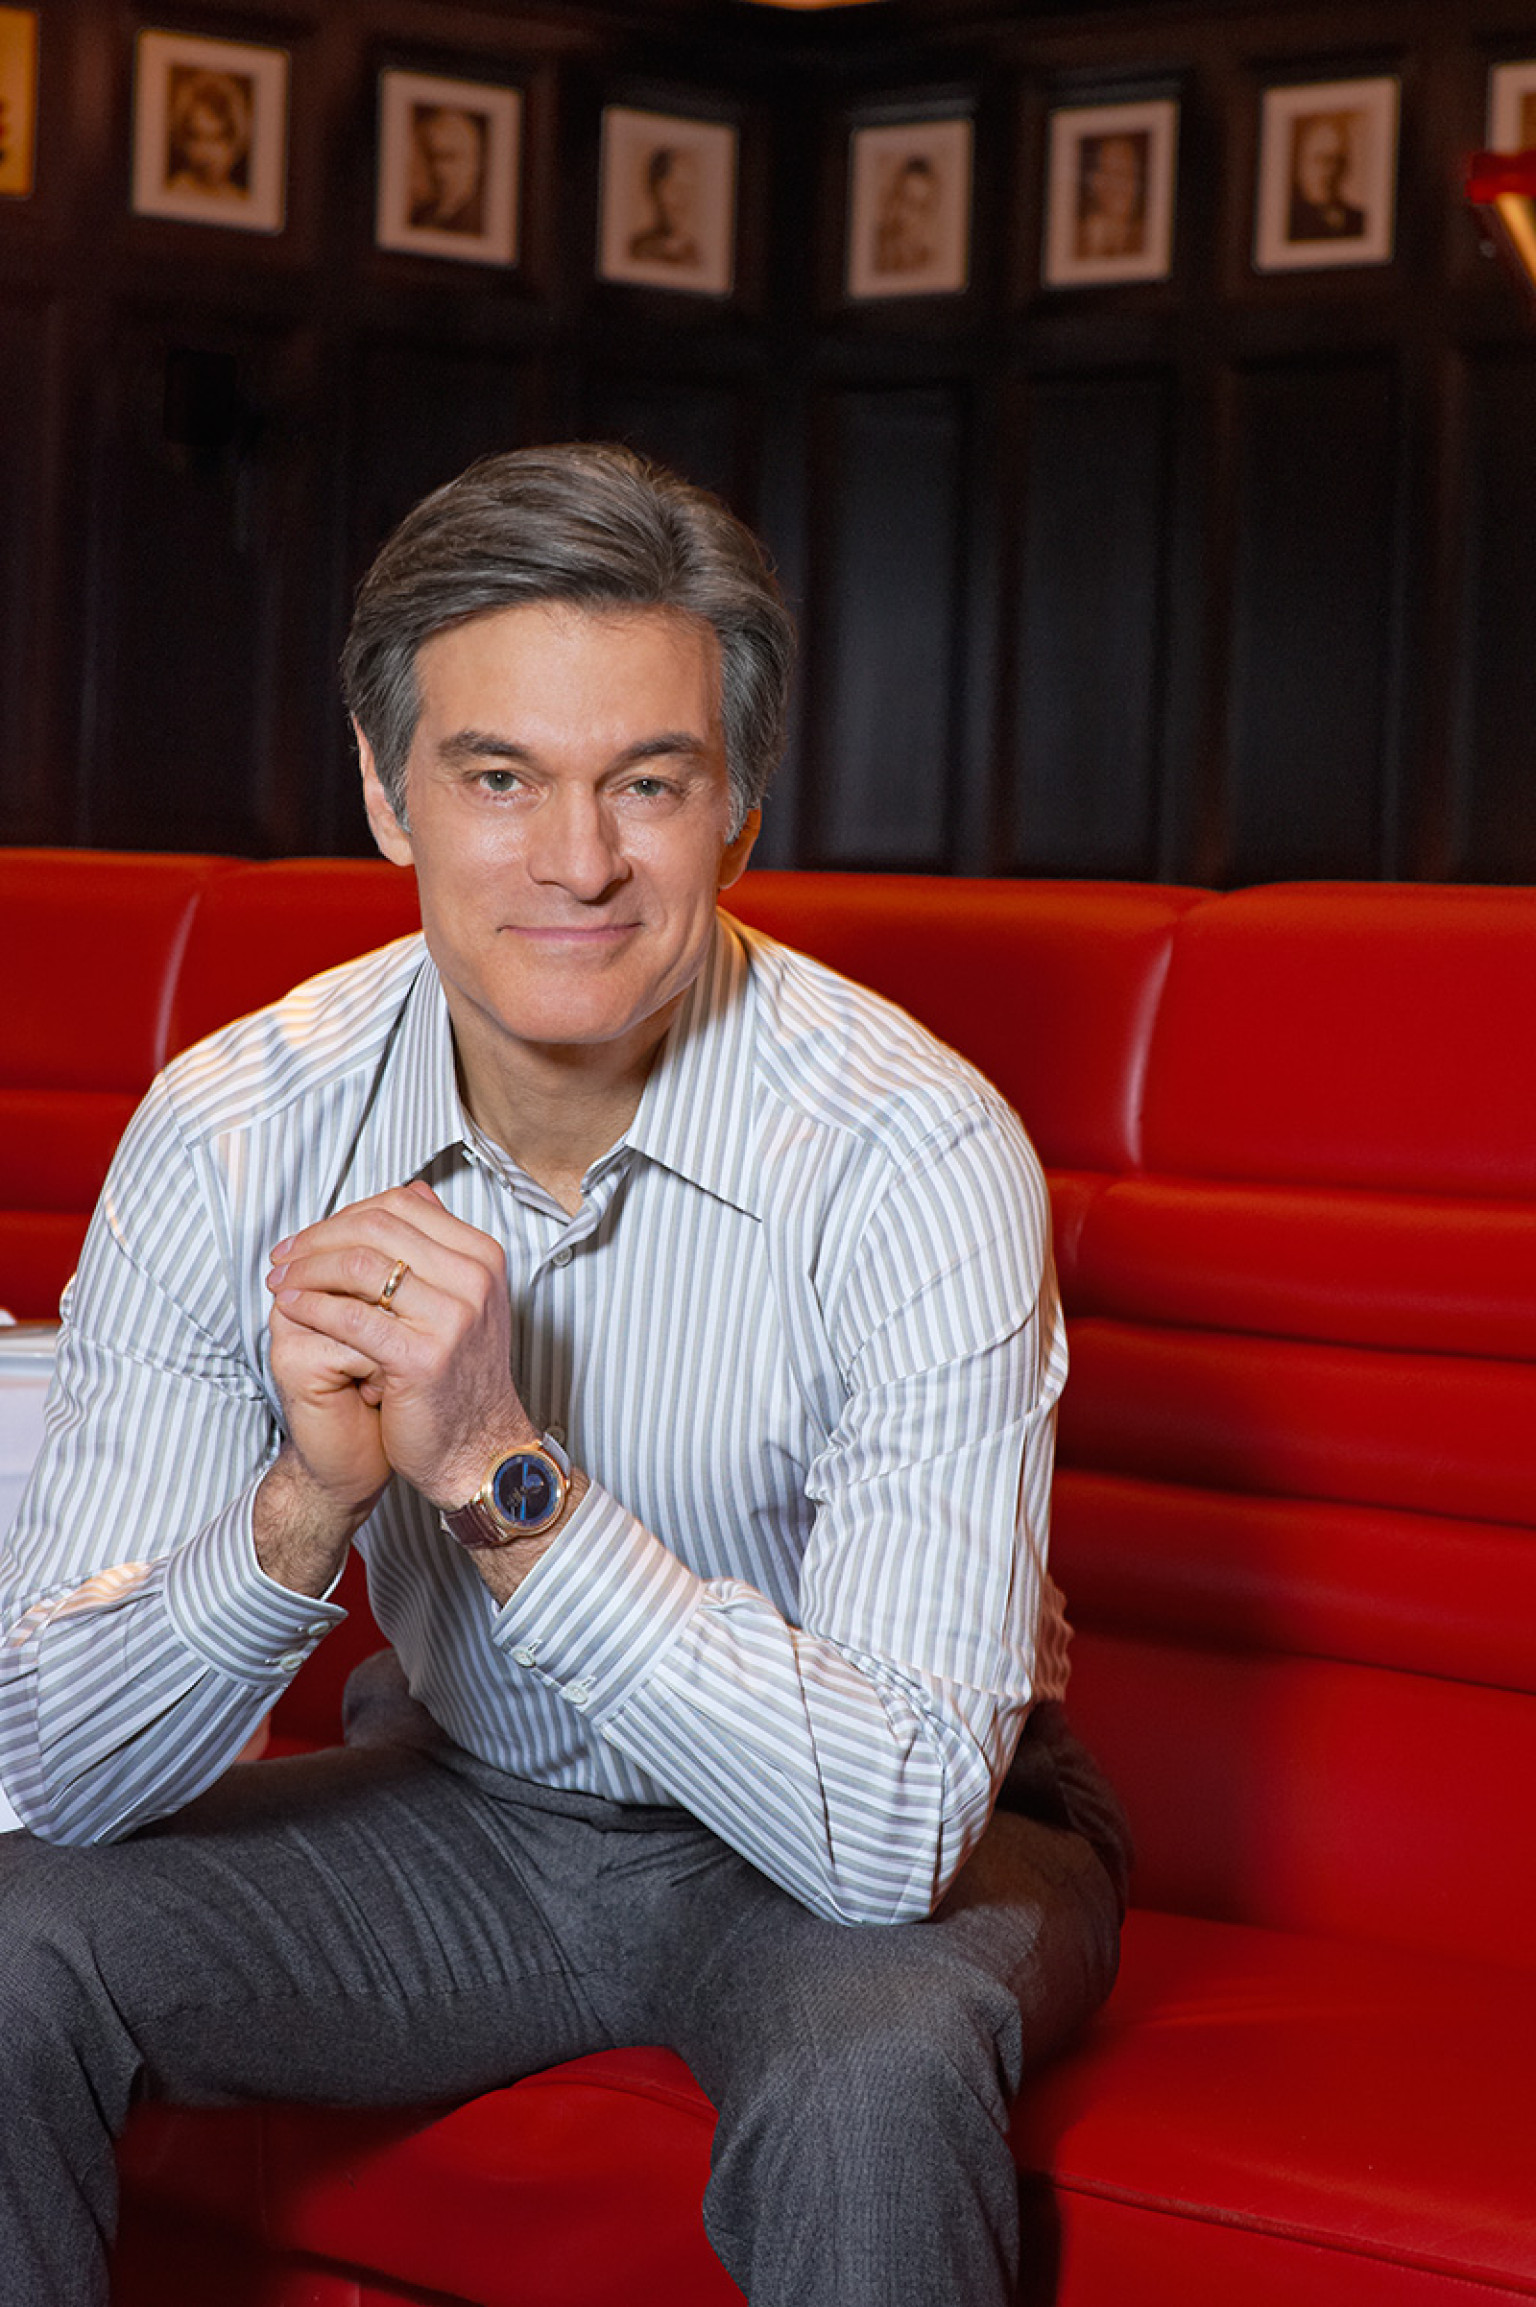 Alcohol And Health Dr Oz S 5 Rules For Healthy Drinking